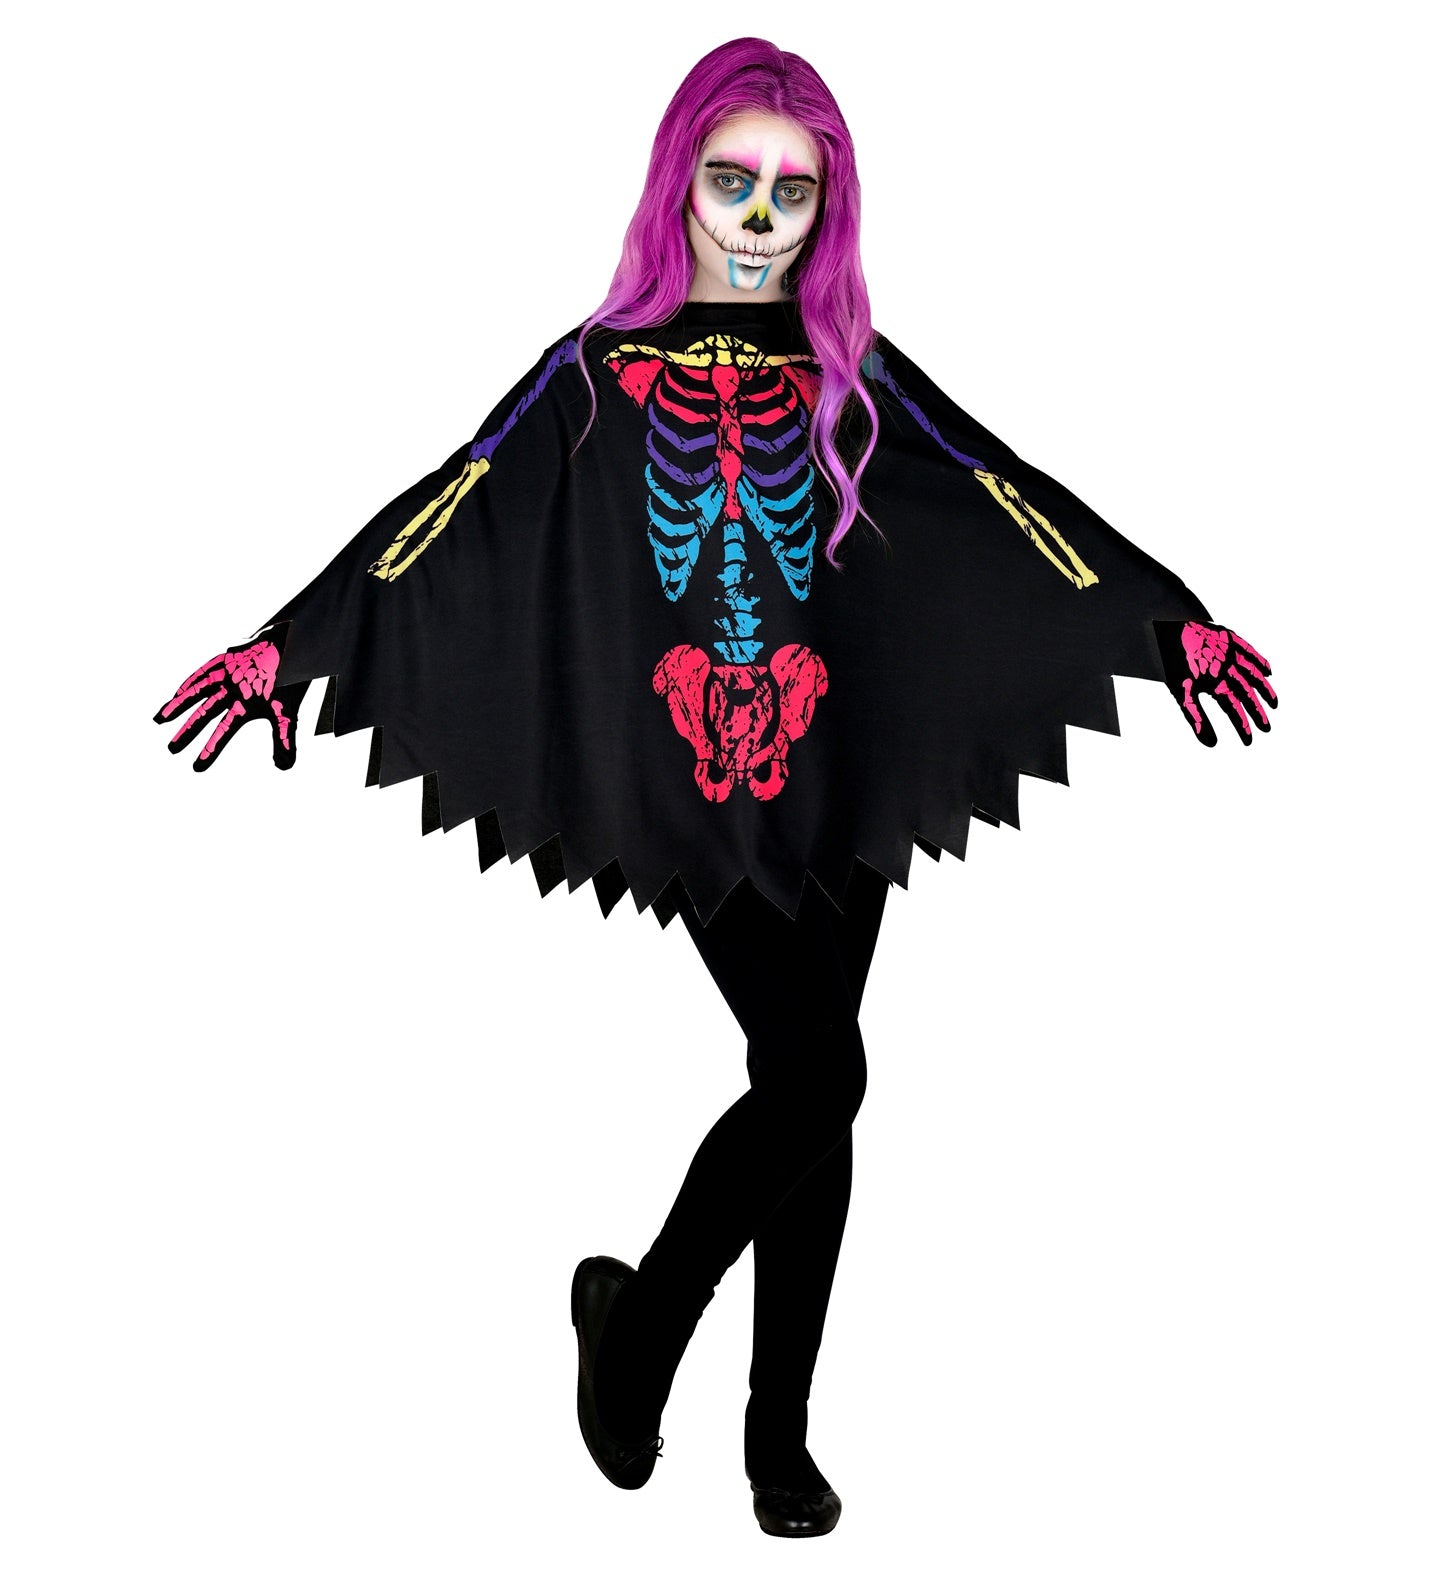 Colorful Skeleton Poncho Child's outfit for Halloween